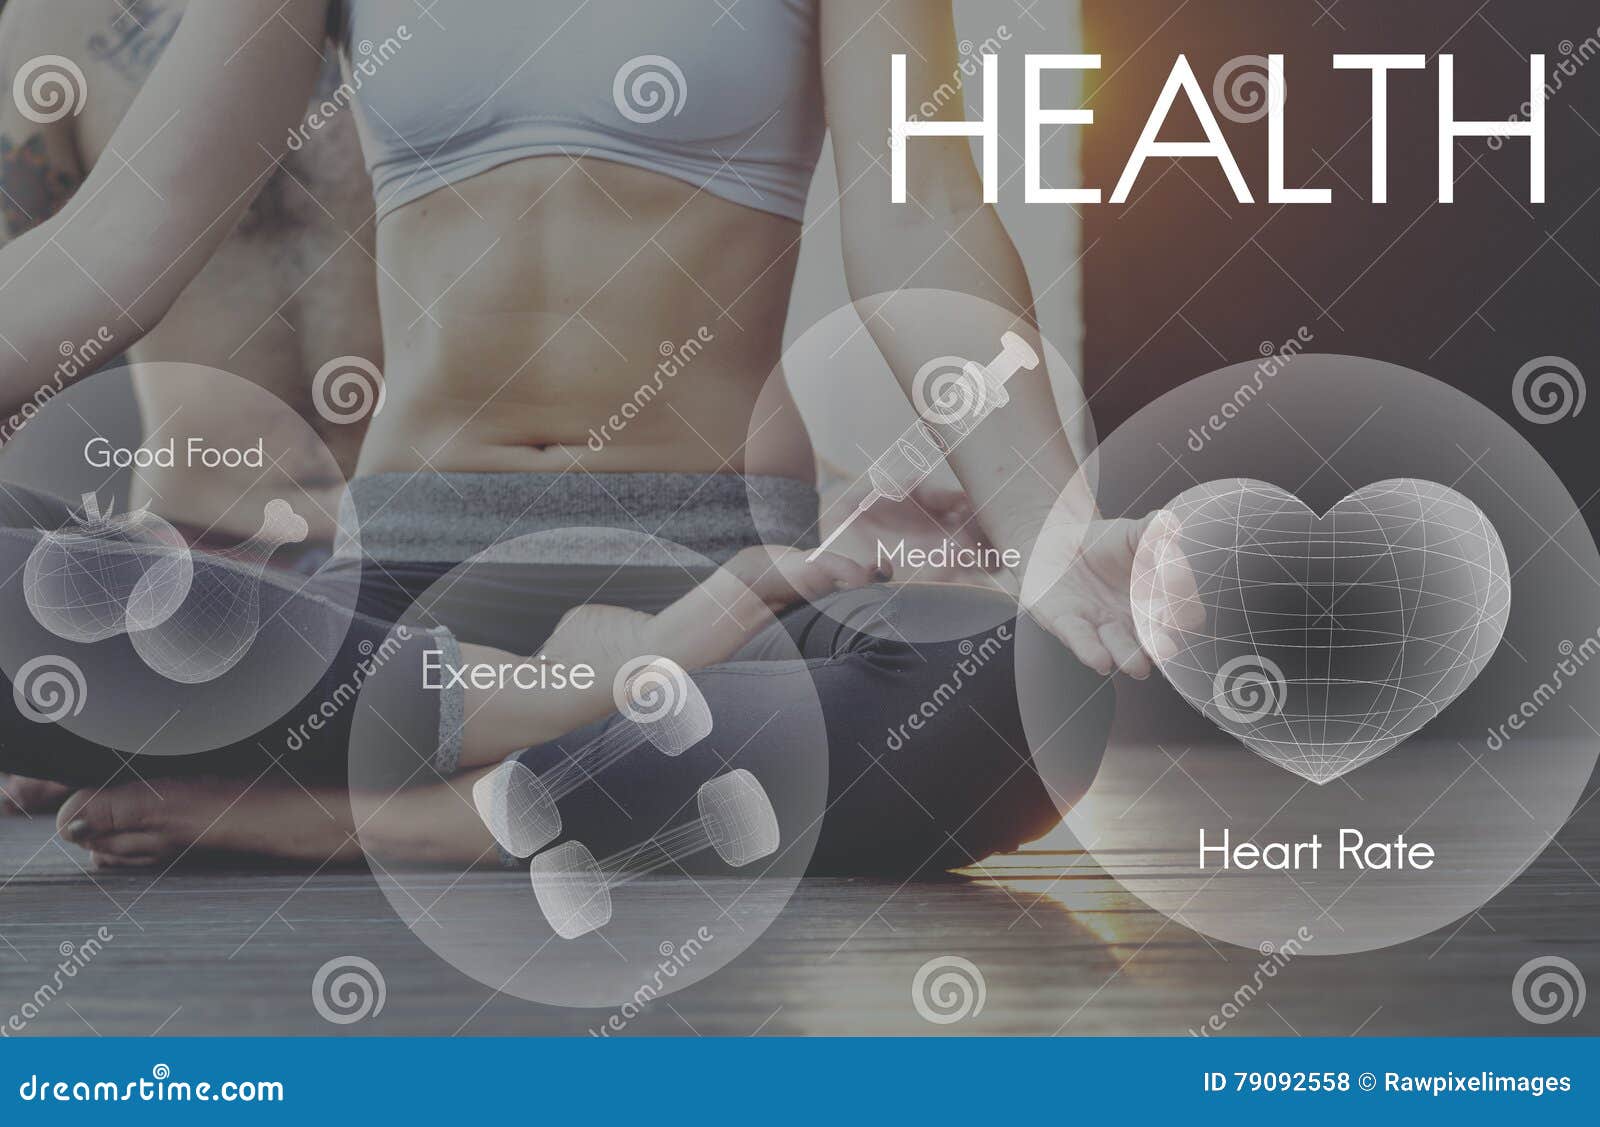 health wellbeing wellness vitality healthcare concept